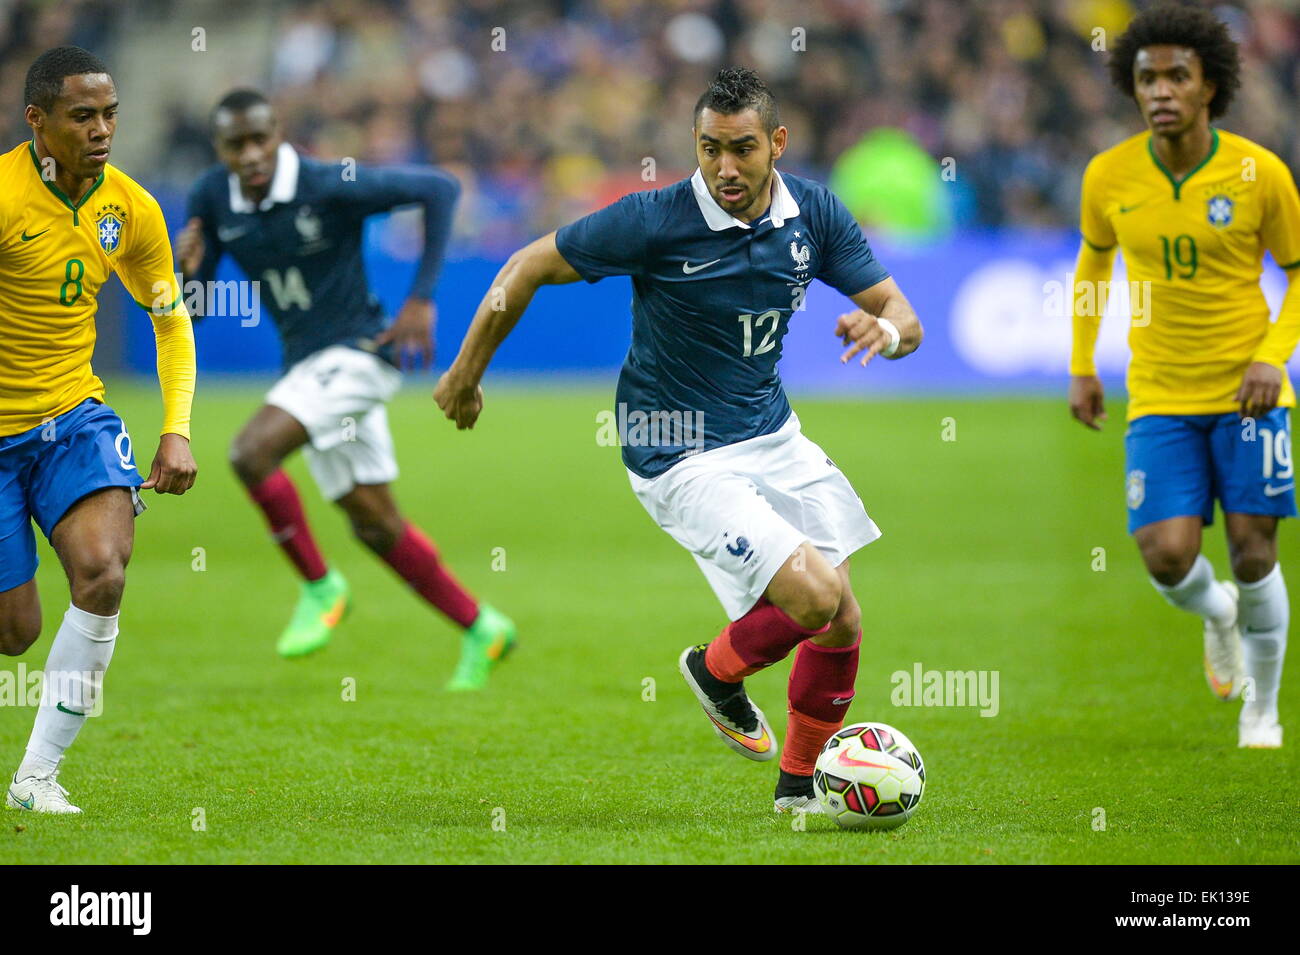 Dimitri Payet - 26.03.2015 - France/Bresil - Match amical.Photo : André Ferreira/Icon Sport Banque D'Images